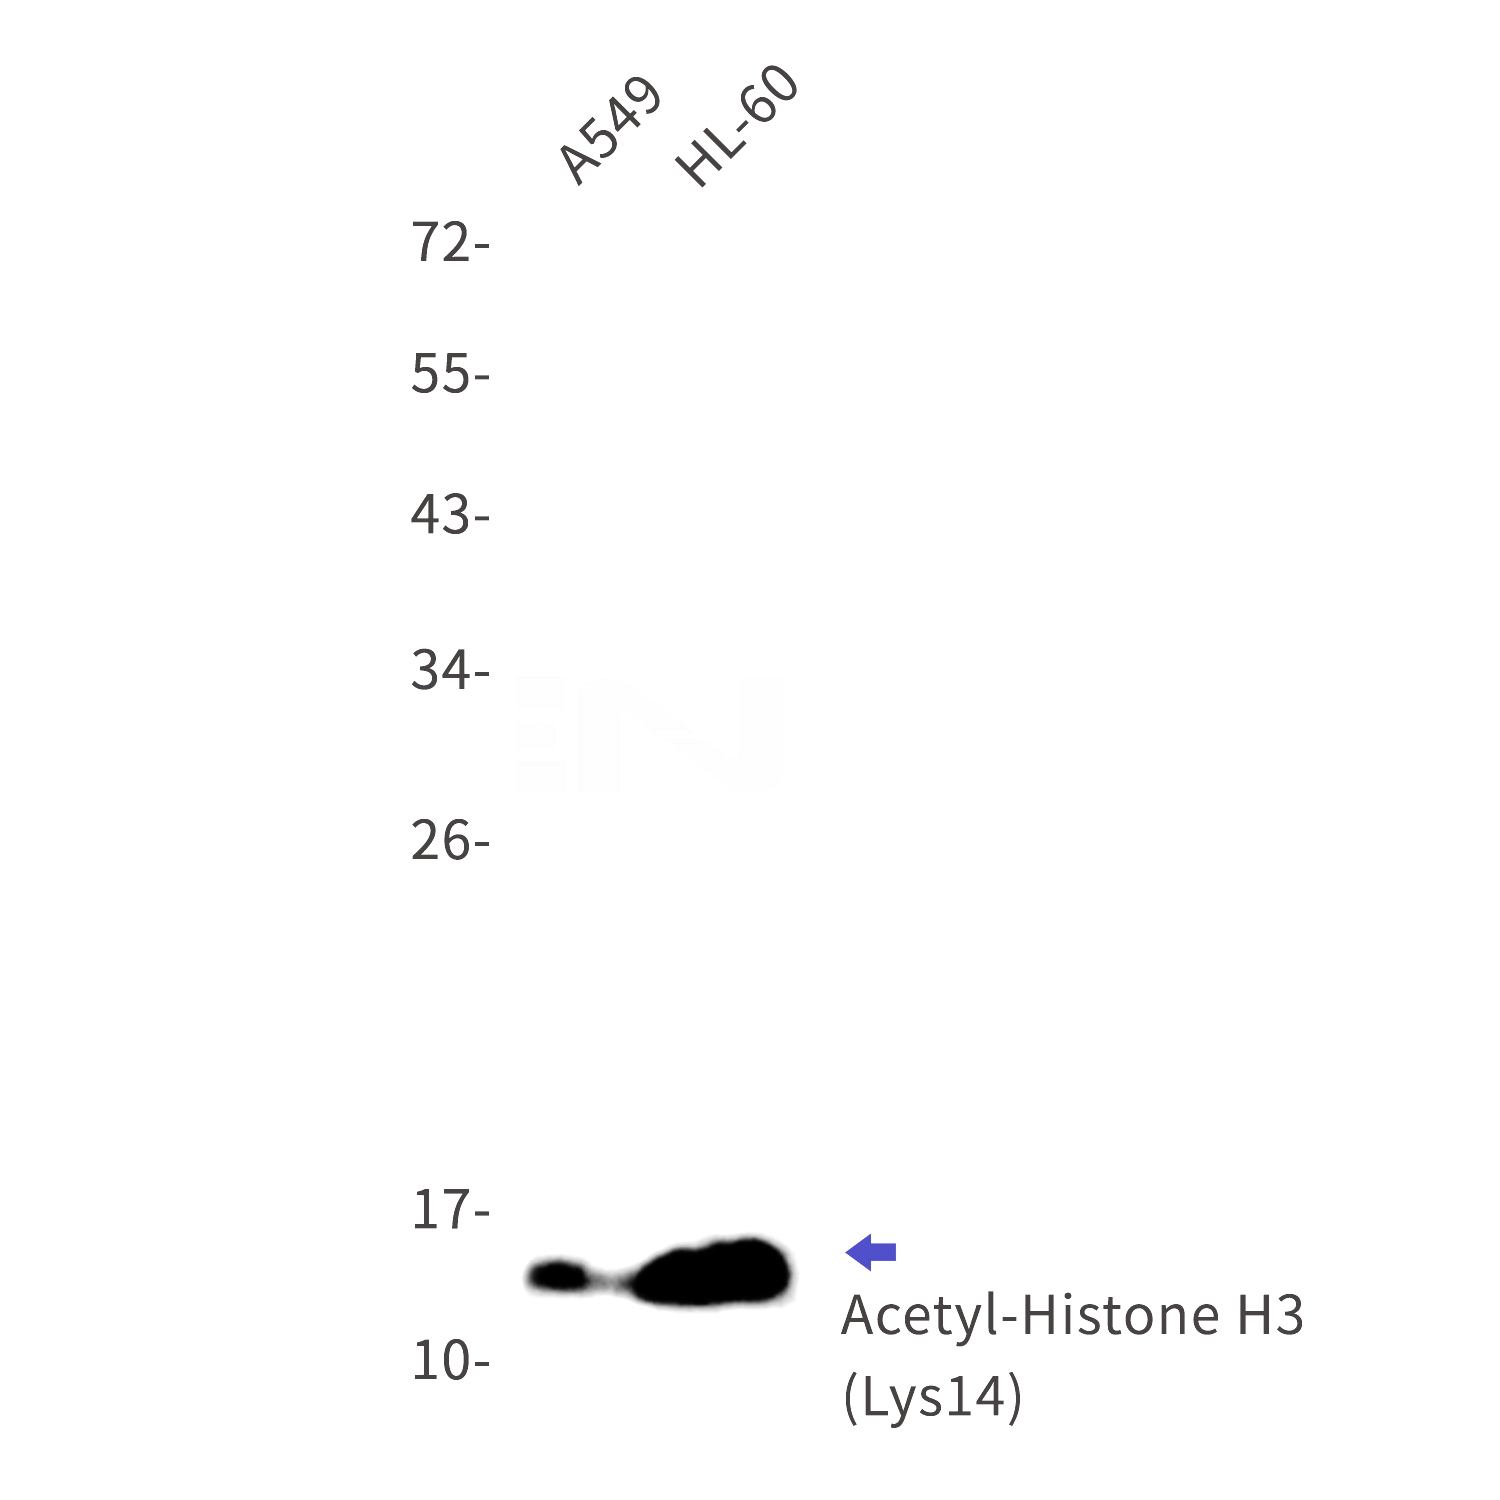 Western blot detection of Acetyl-Histone H3 (Lys14) in A549,HL-60 cell lysates using Acetyl-Histone H3 (Lys14) Rabbit mAb(1:1000 diluted).Observed band size:15kDa.